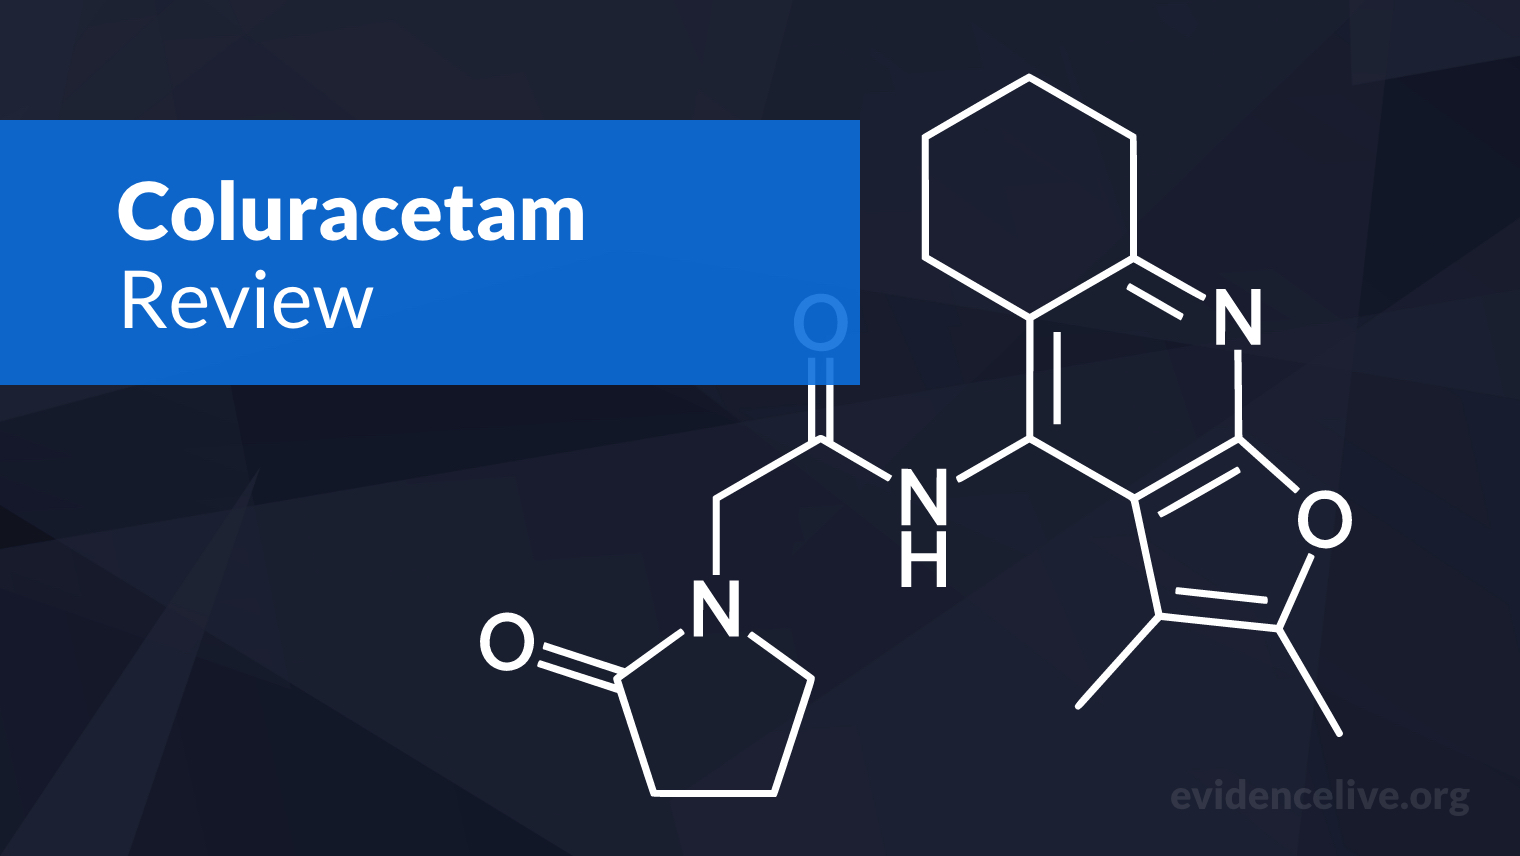 Coluracetam Review: Benefits, Dosage, and Side Effects